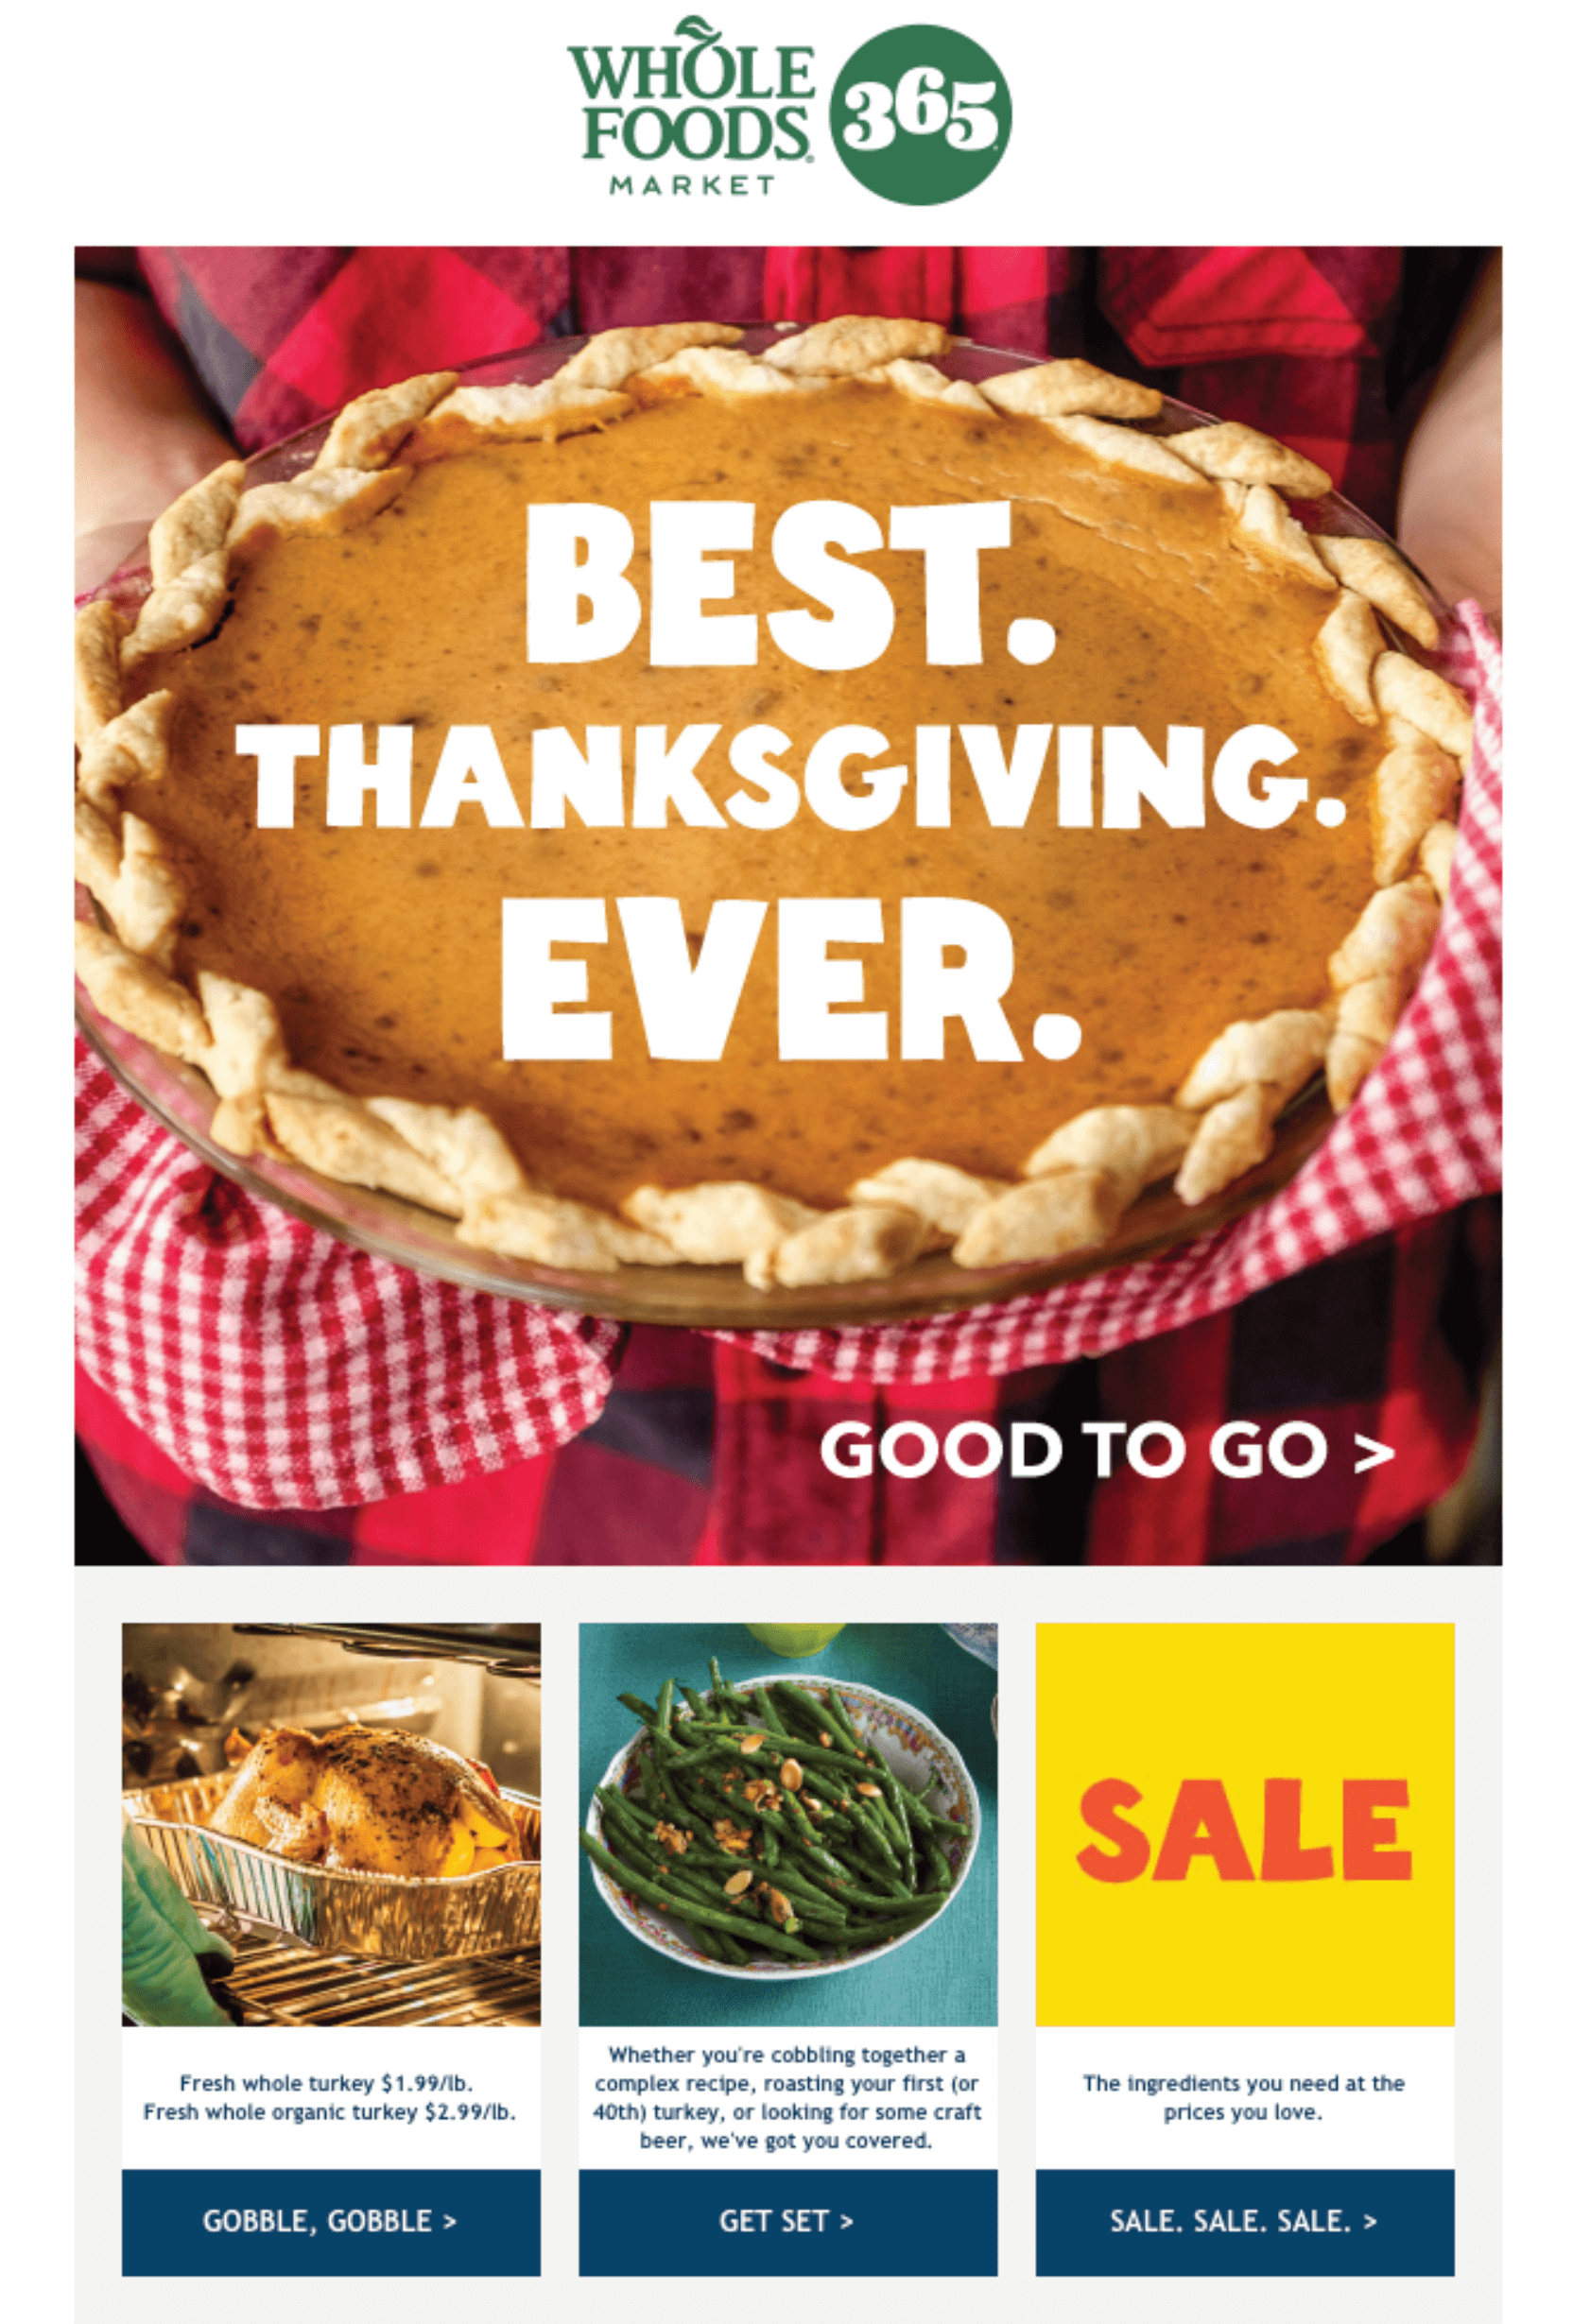 Whole_Foods_Market_365_thanksgiving_email_example